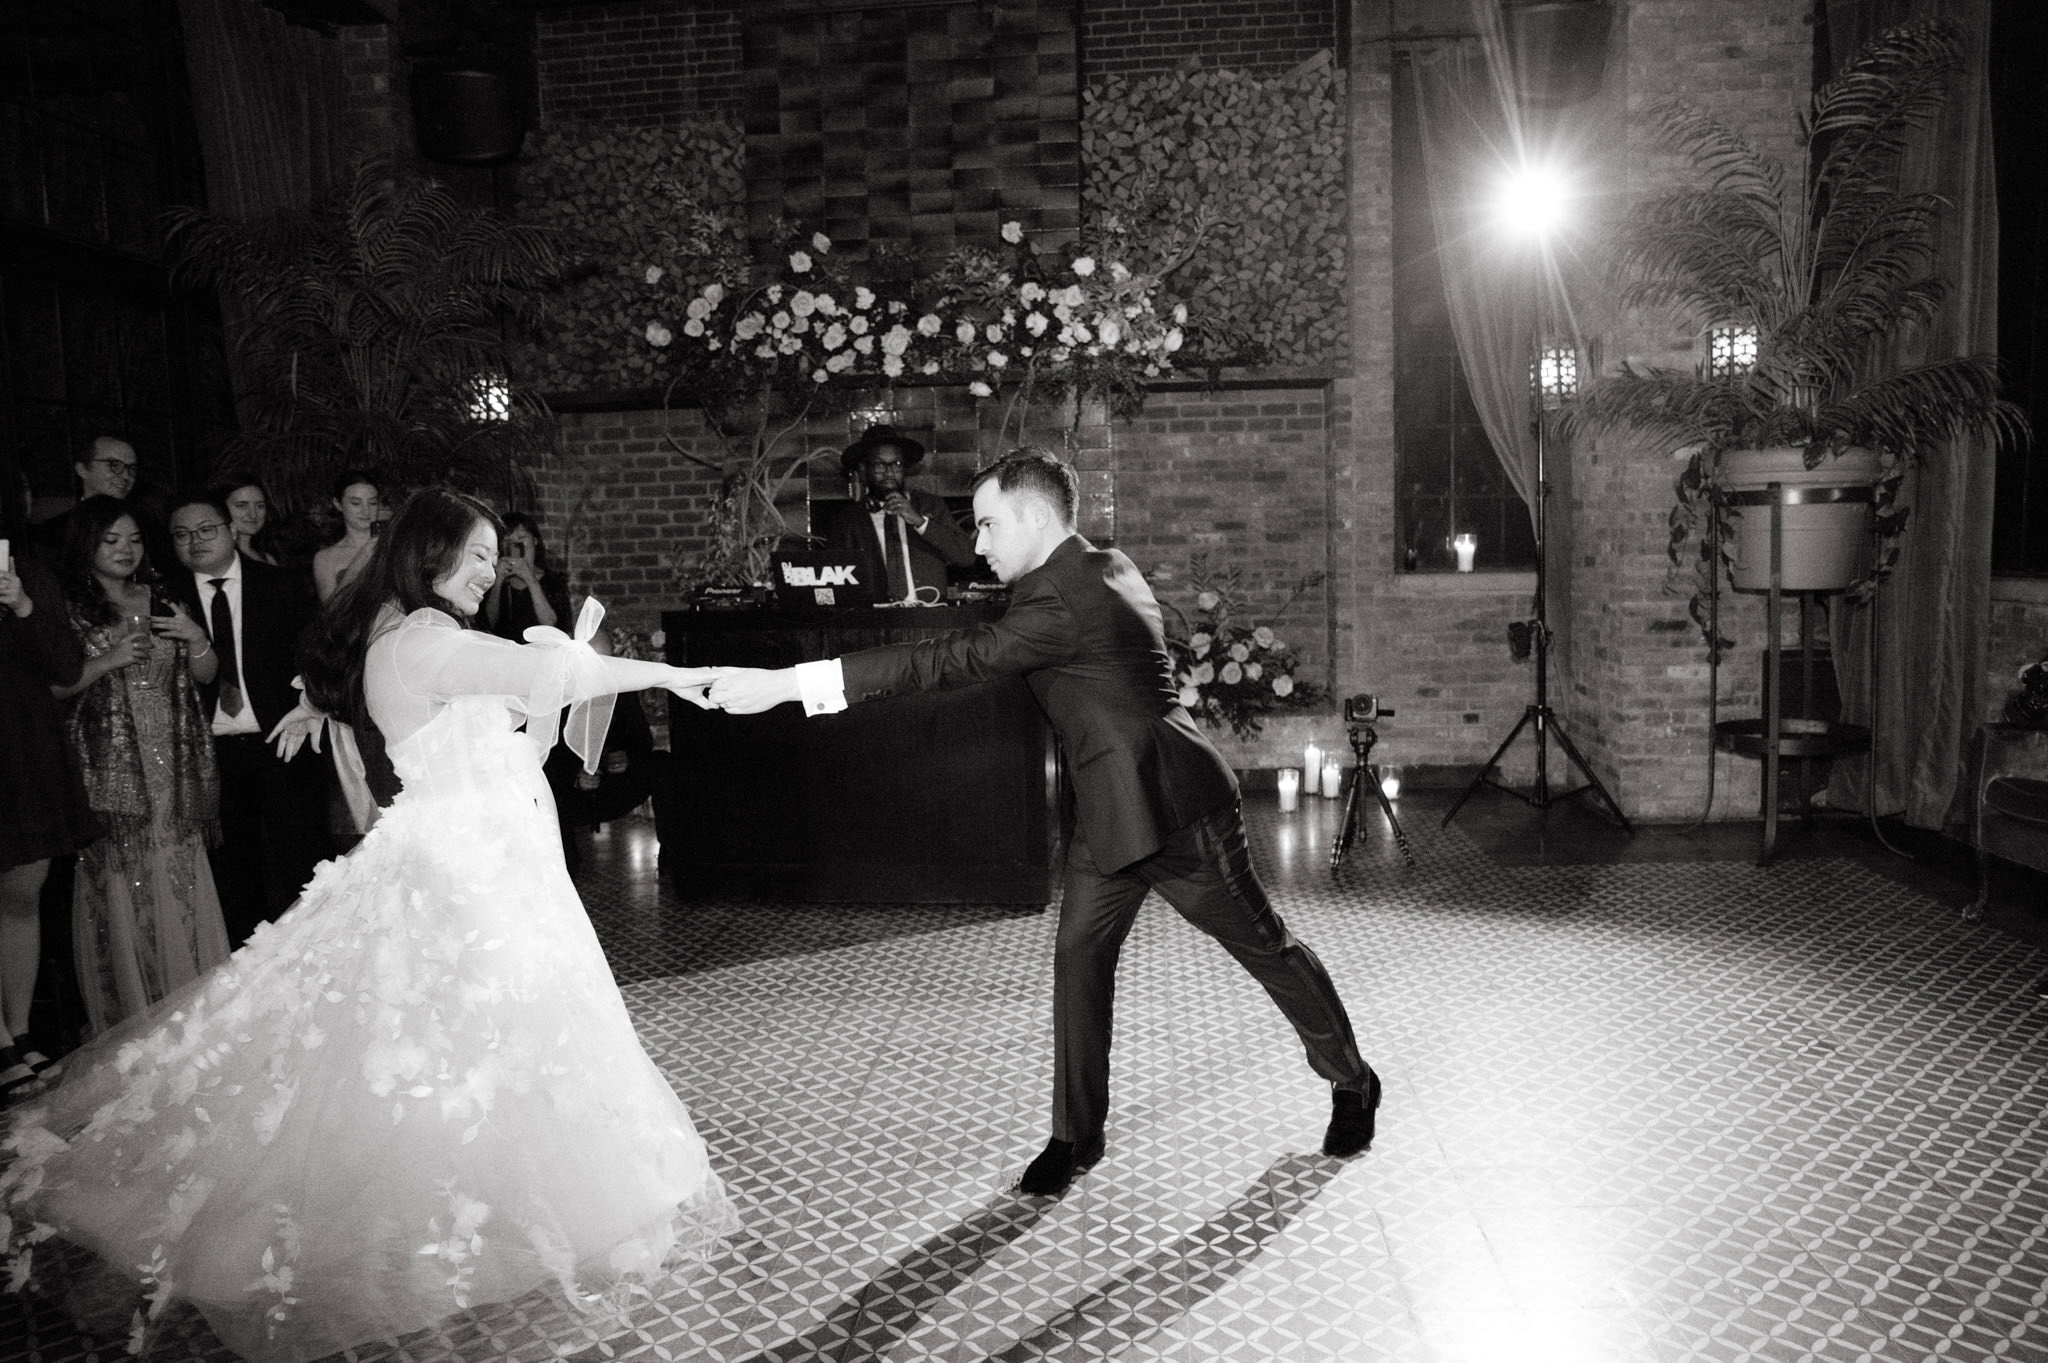 Editorial photo of the couple's first dance. Image by Jenny Fu Studio